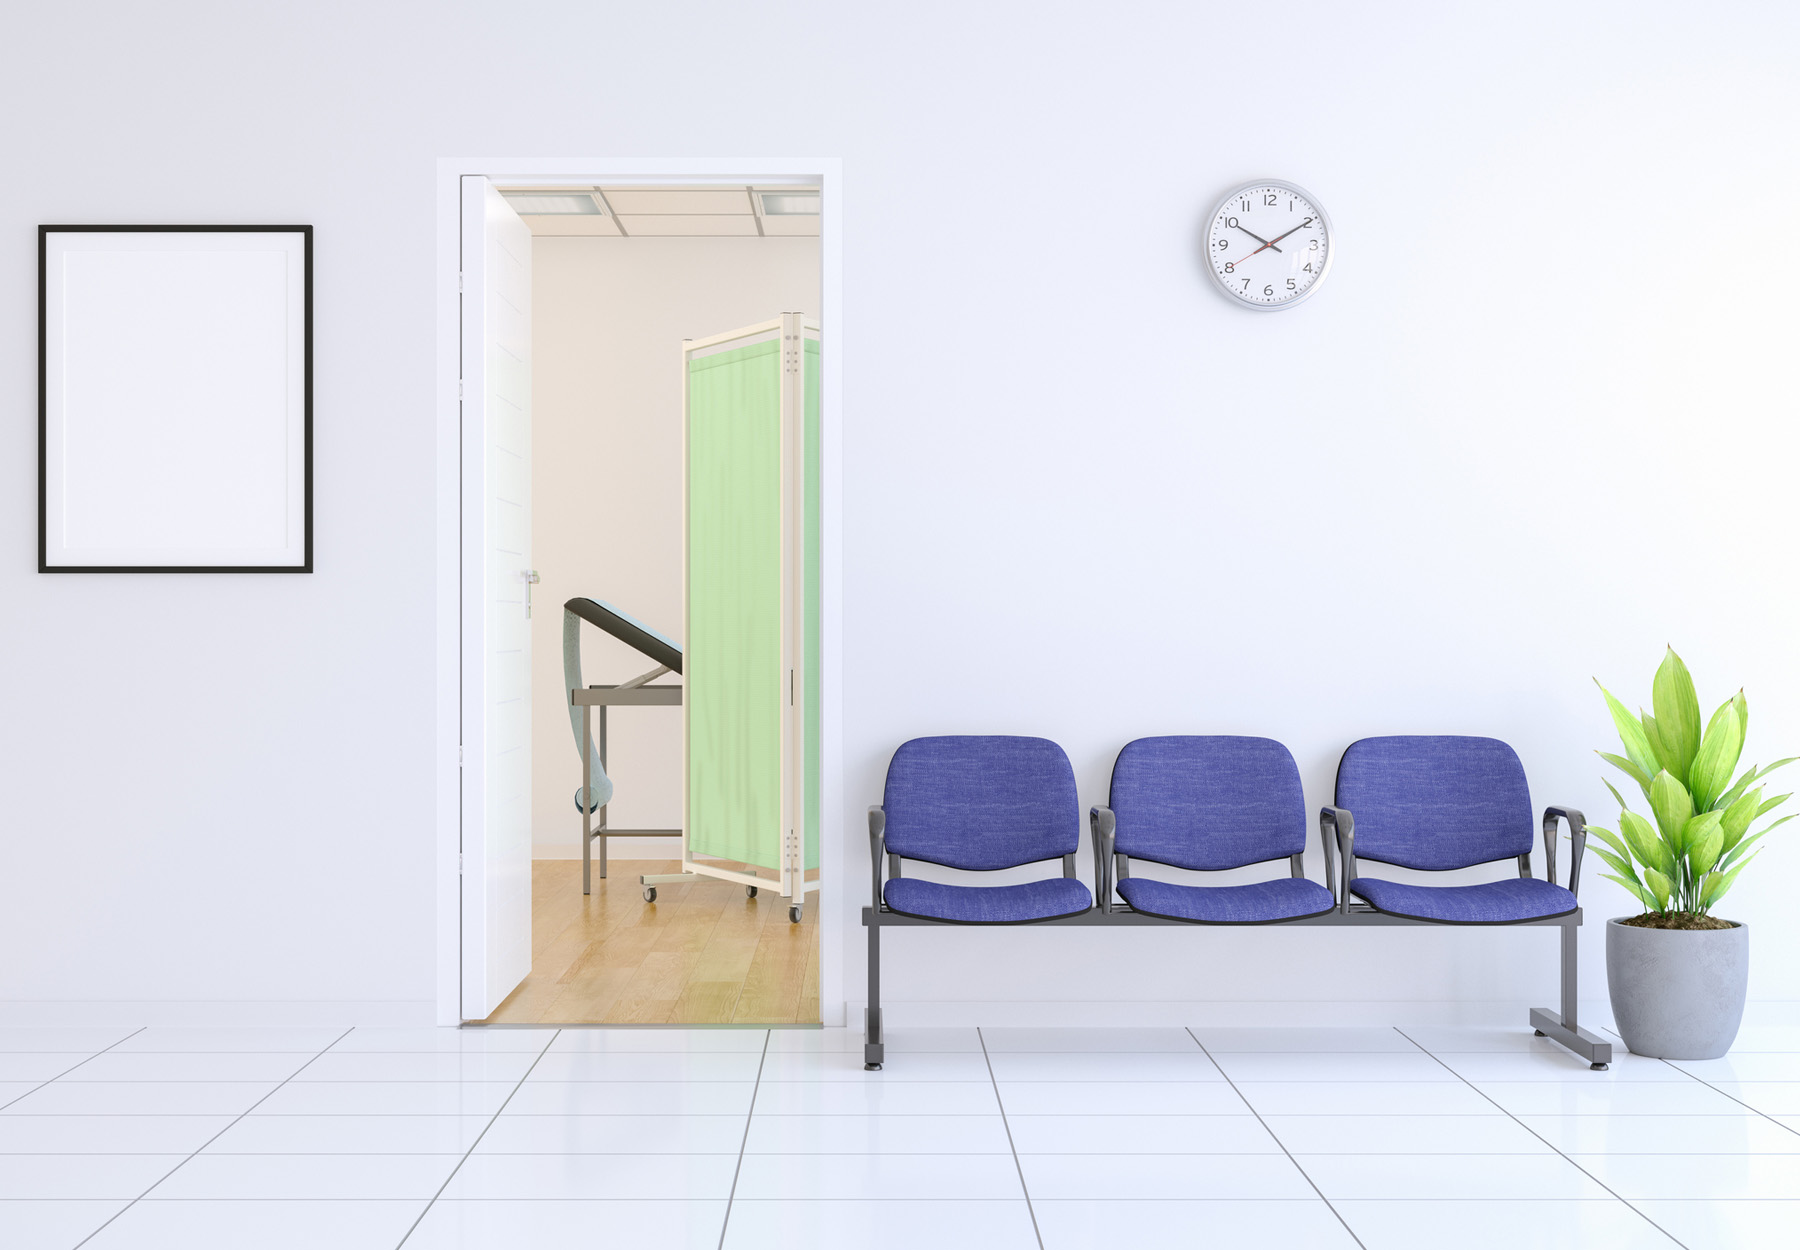 Waiting room of doctor's office stock image.